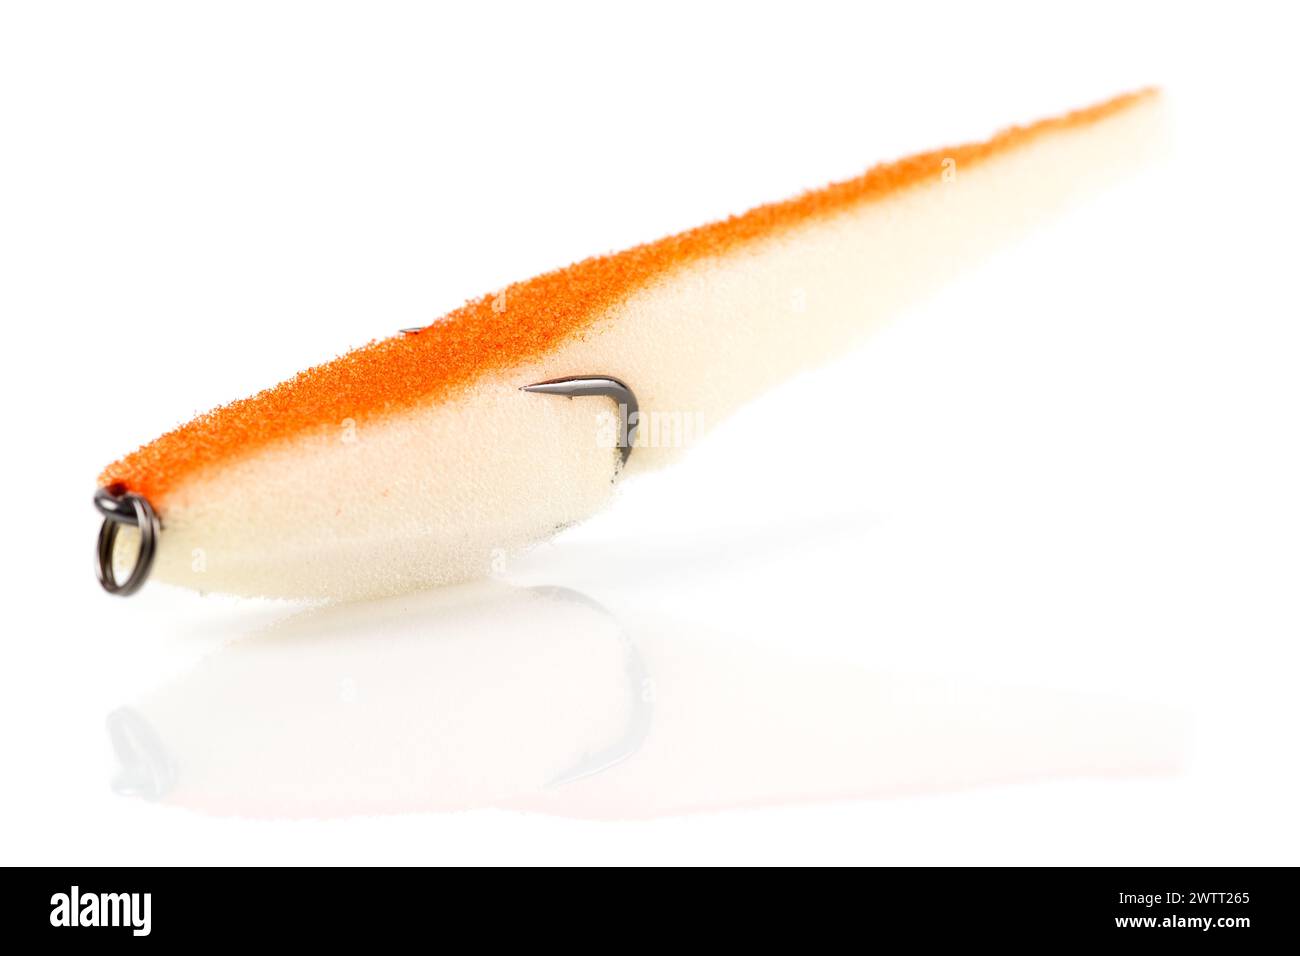 Homemade artificial fishing lure made of foam rubber, isolated on white background Stock Photo